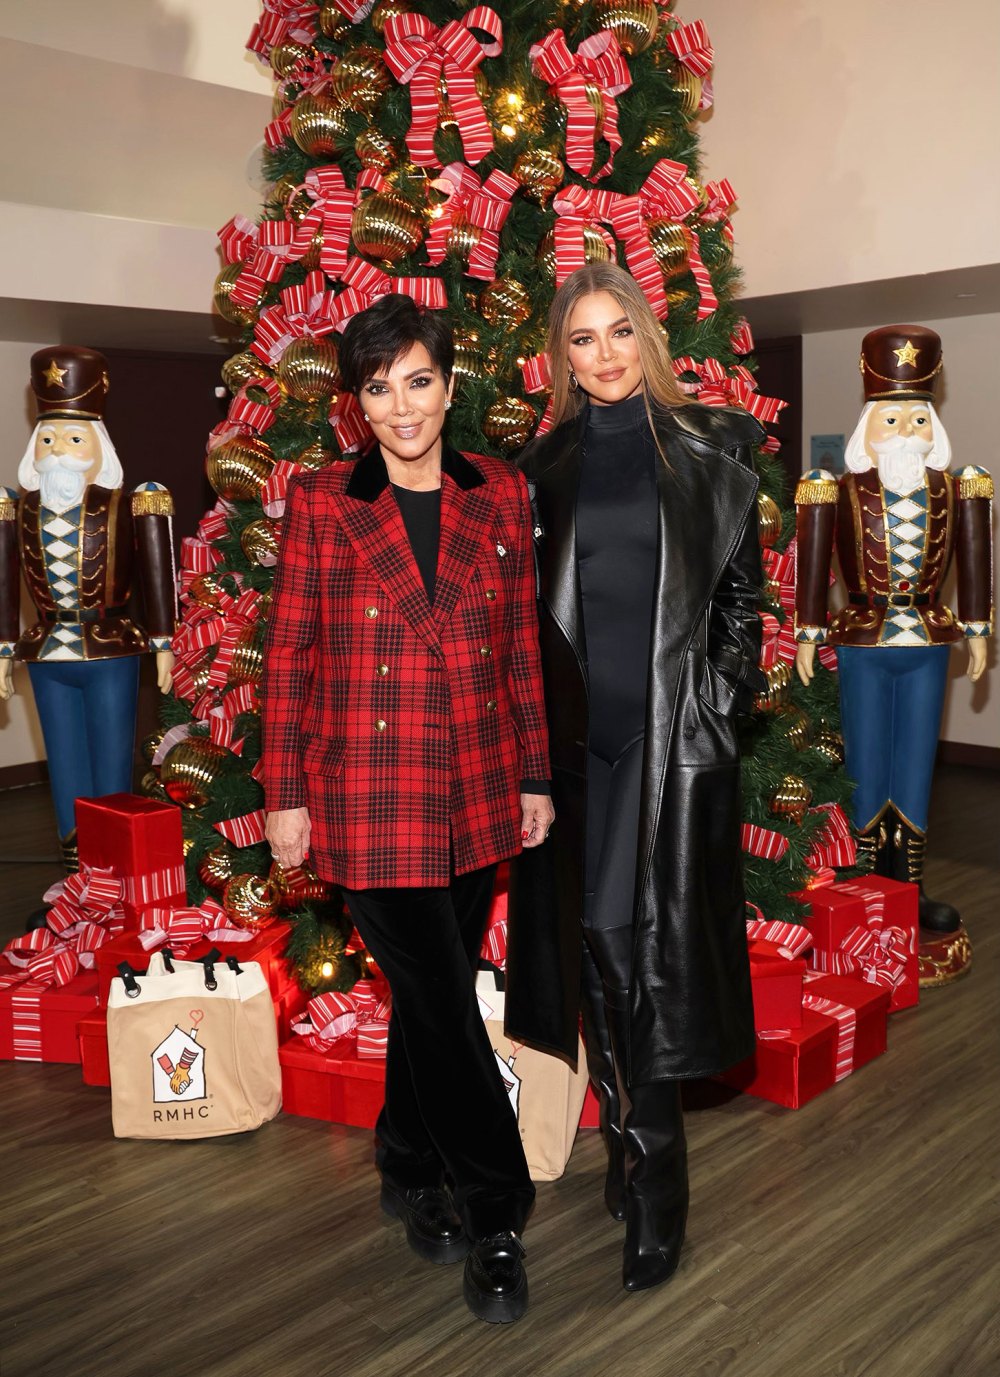 Khloe Kardashian Jokes That Kris Jenner Mistreats Her the Most After Their Fight